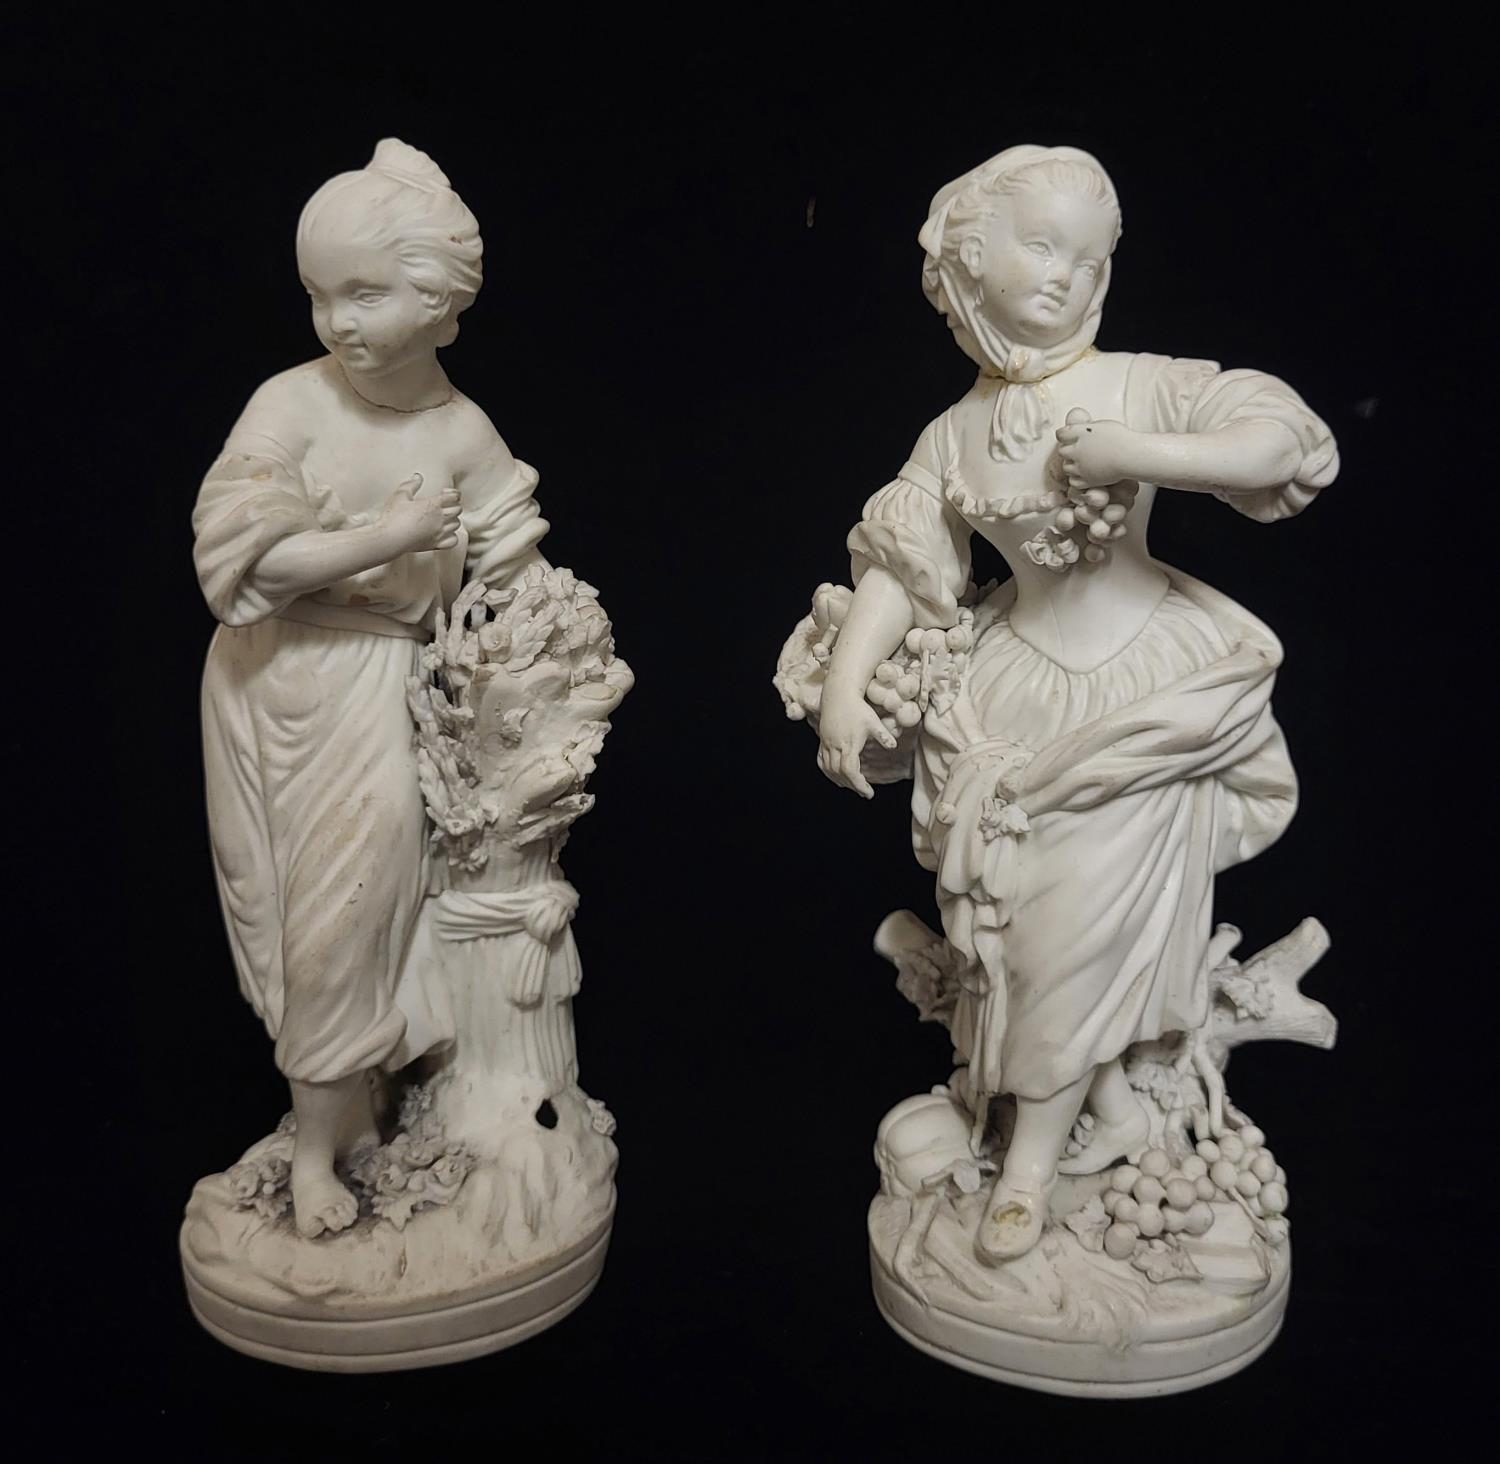 A PAIR OF EARLY 19TH CENTURY DERBY BLANC DE CHINE PORCELAIN FIGURES Female characters wearing period - Image 11 of 11